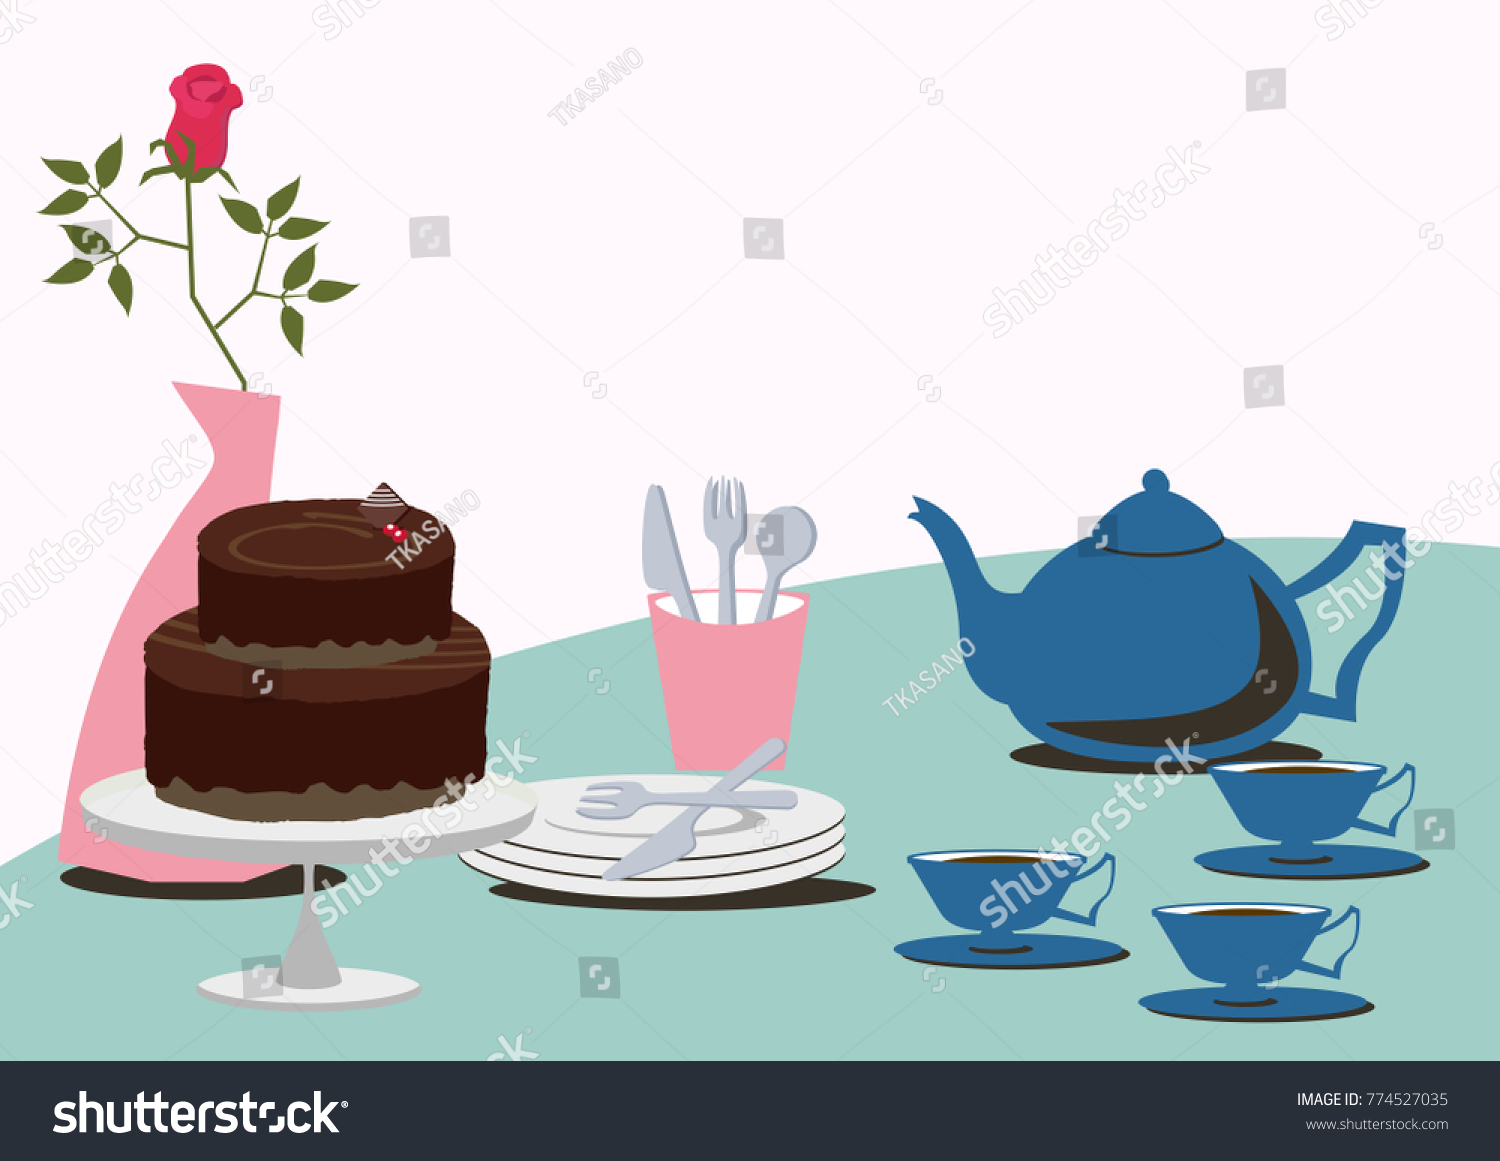 Image of Valentine's Day.
Chocolate cake.
Image of tea time.
Tea time table set. #774527035